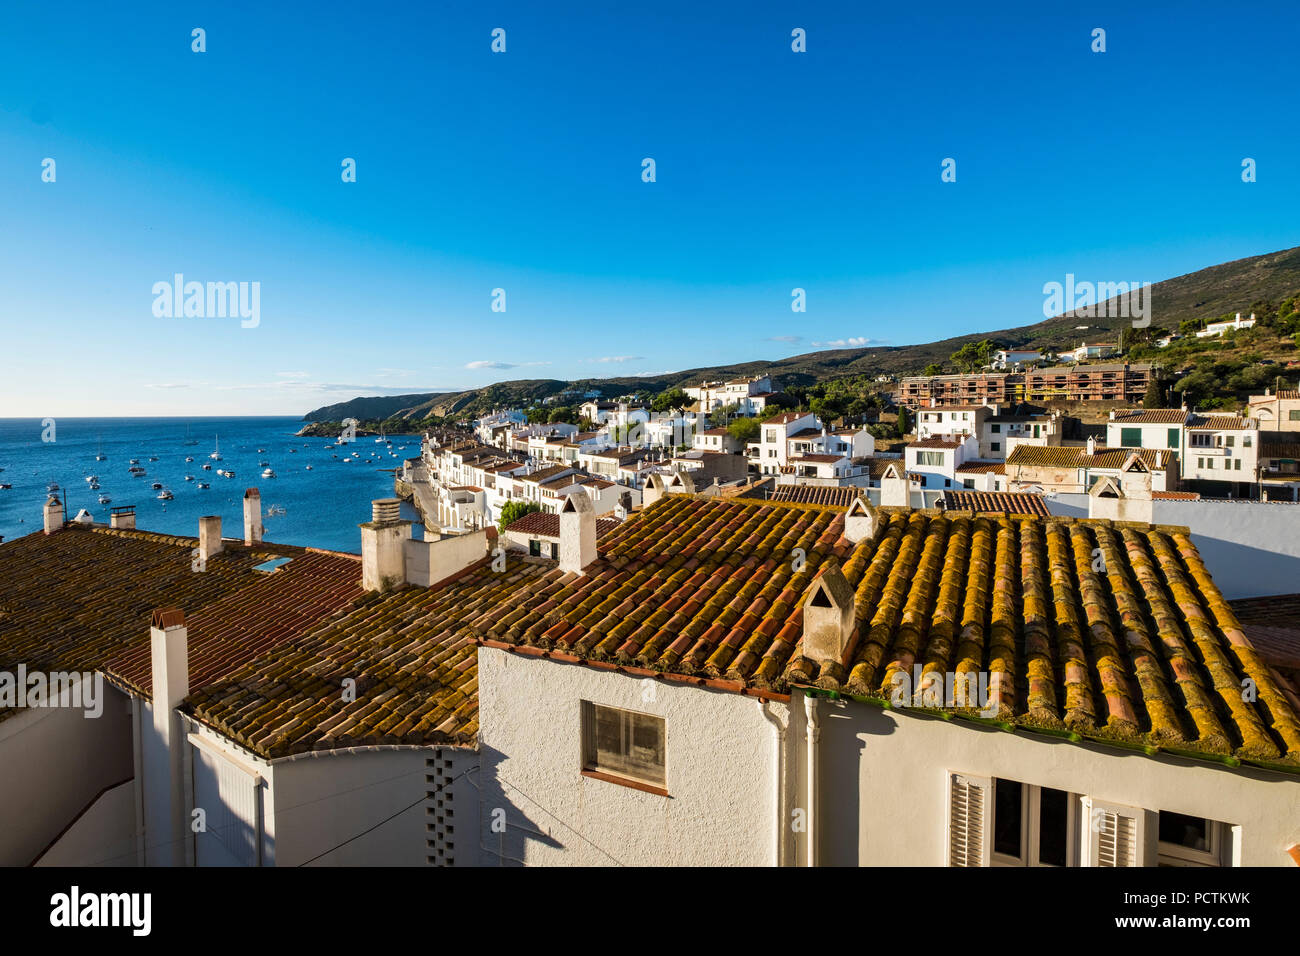 The fishing village of Cadaques is one of the main tourist destinations of the Costa Brava in the province of Gerona in Catalonia Spain Stock Photo